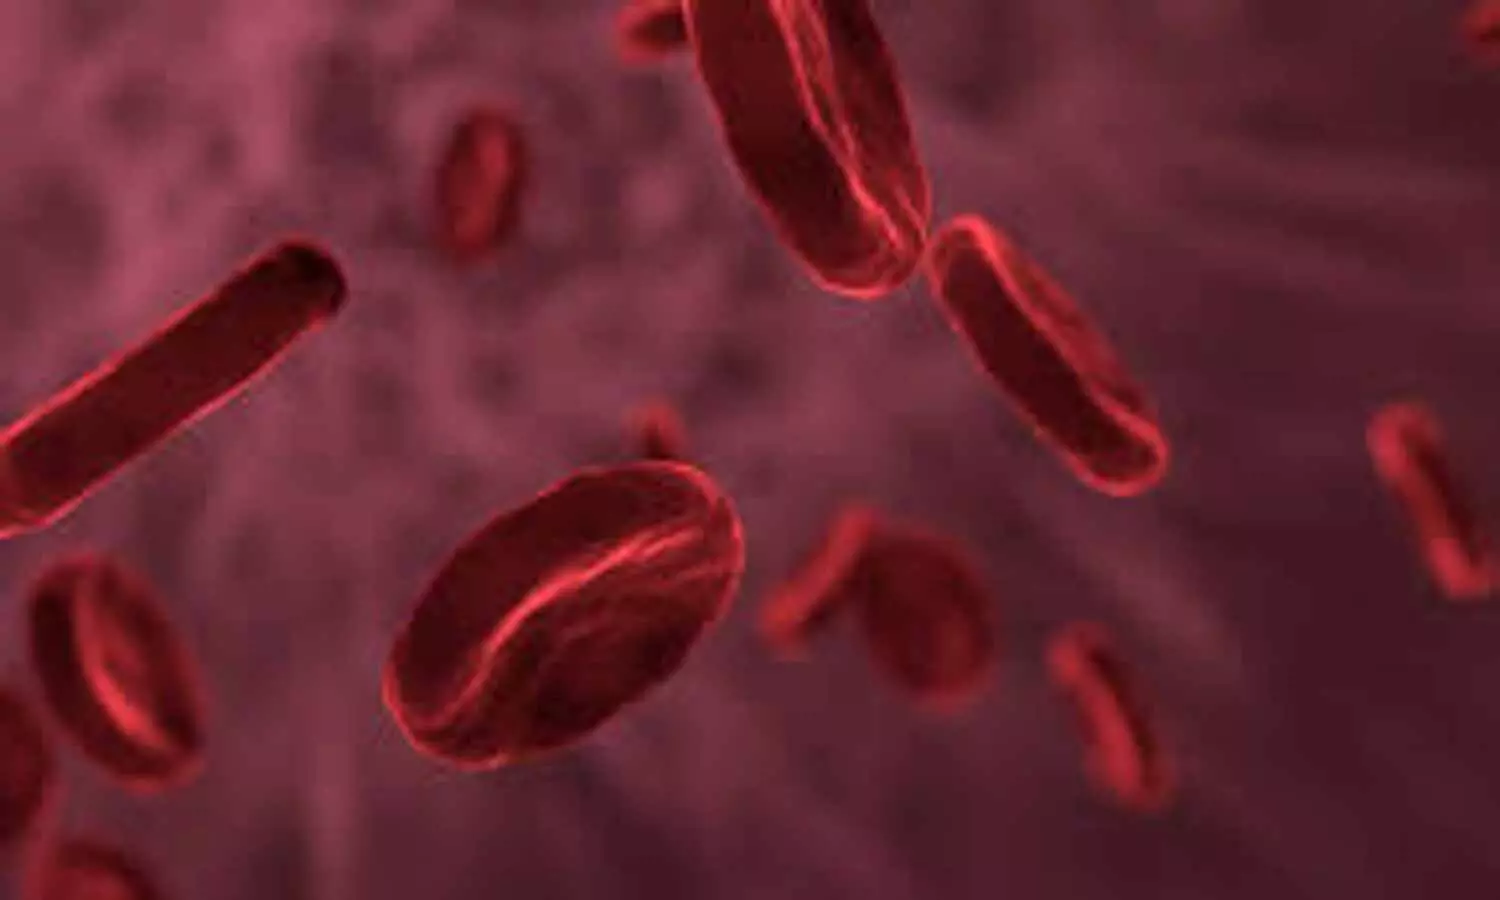 New technology diagnoses sickle cell disease in one minute only